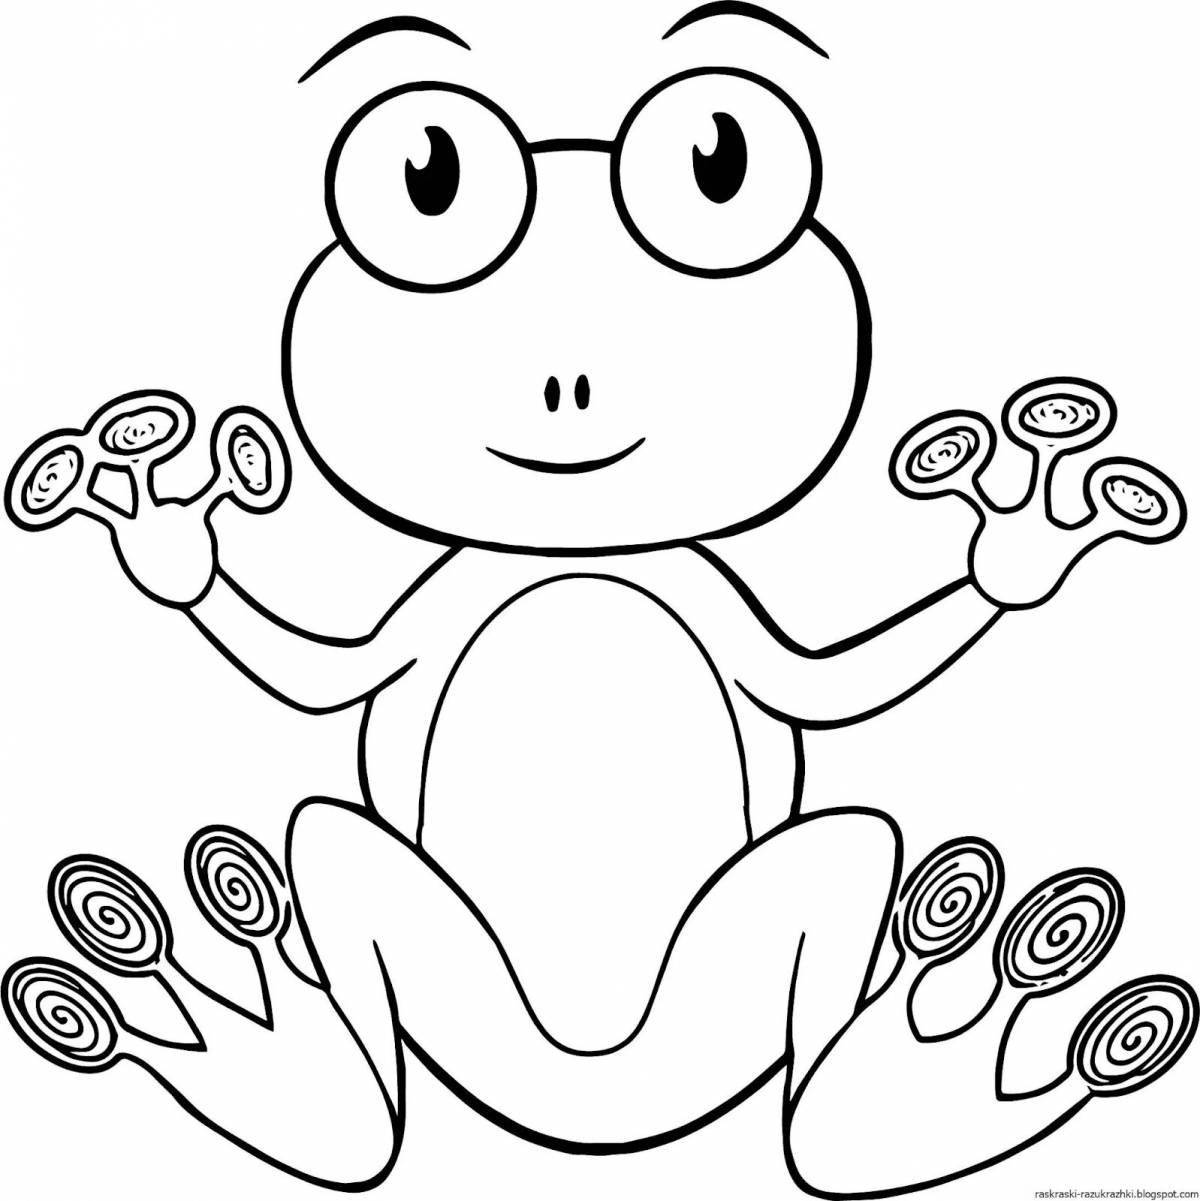 Whimsical frog drawing for kids